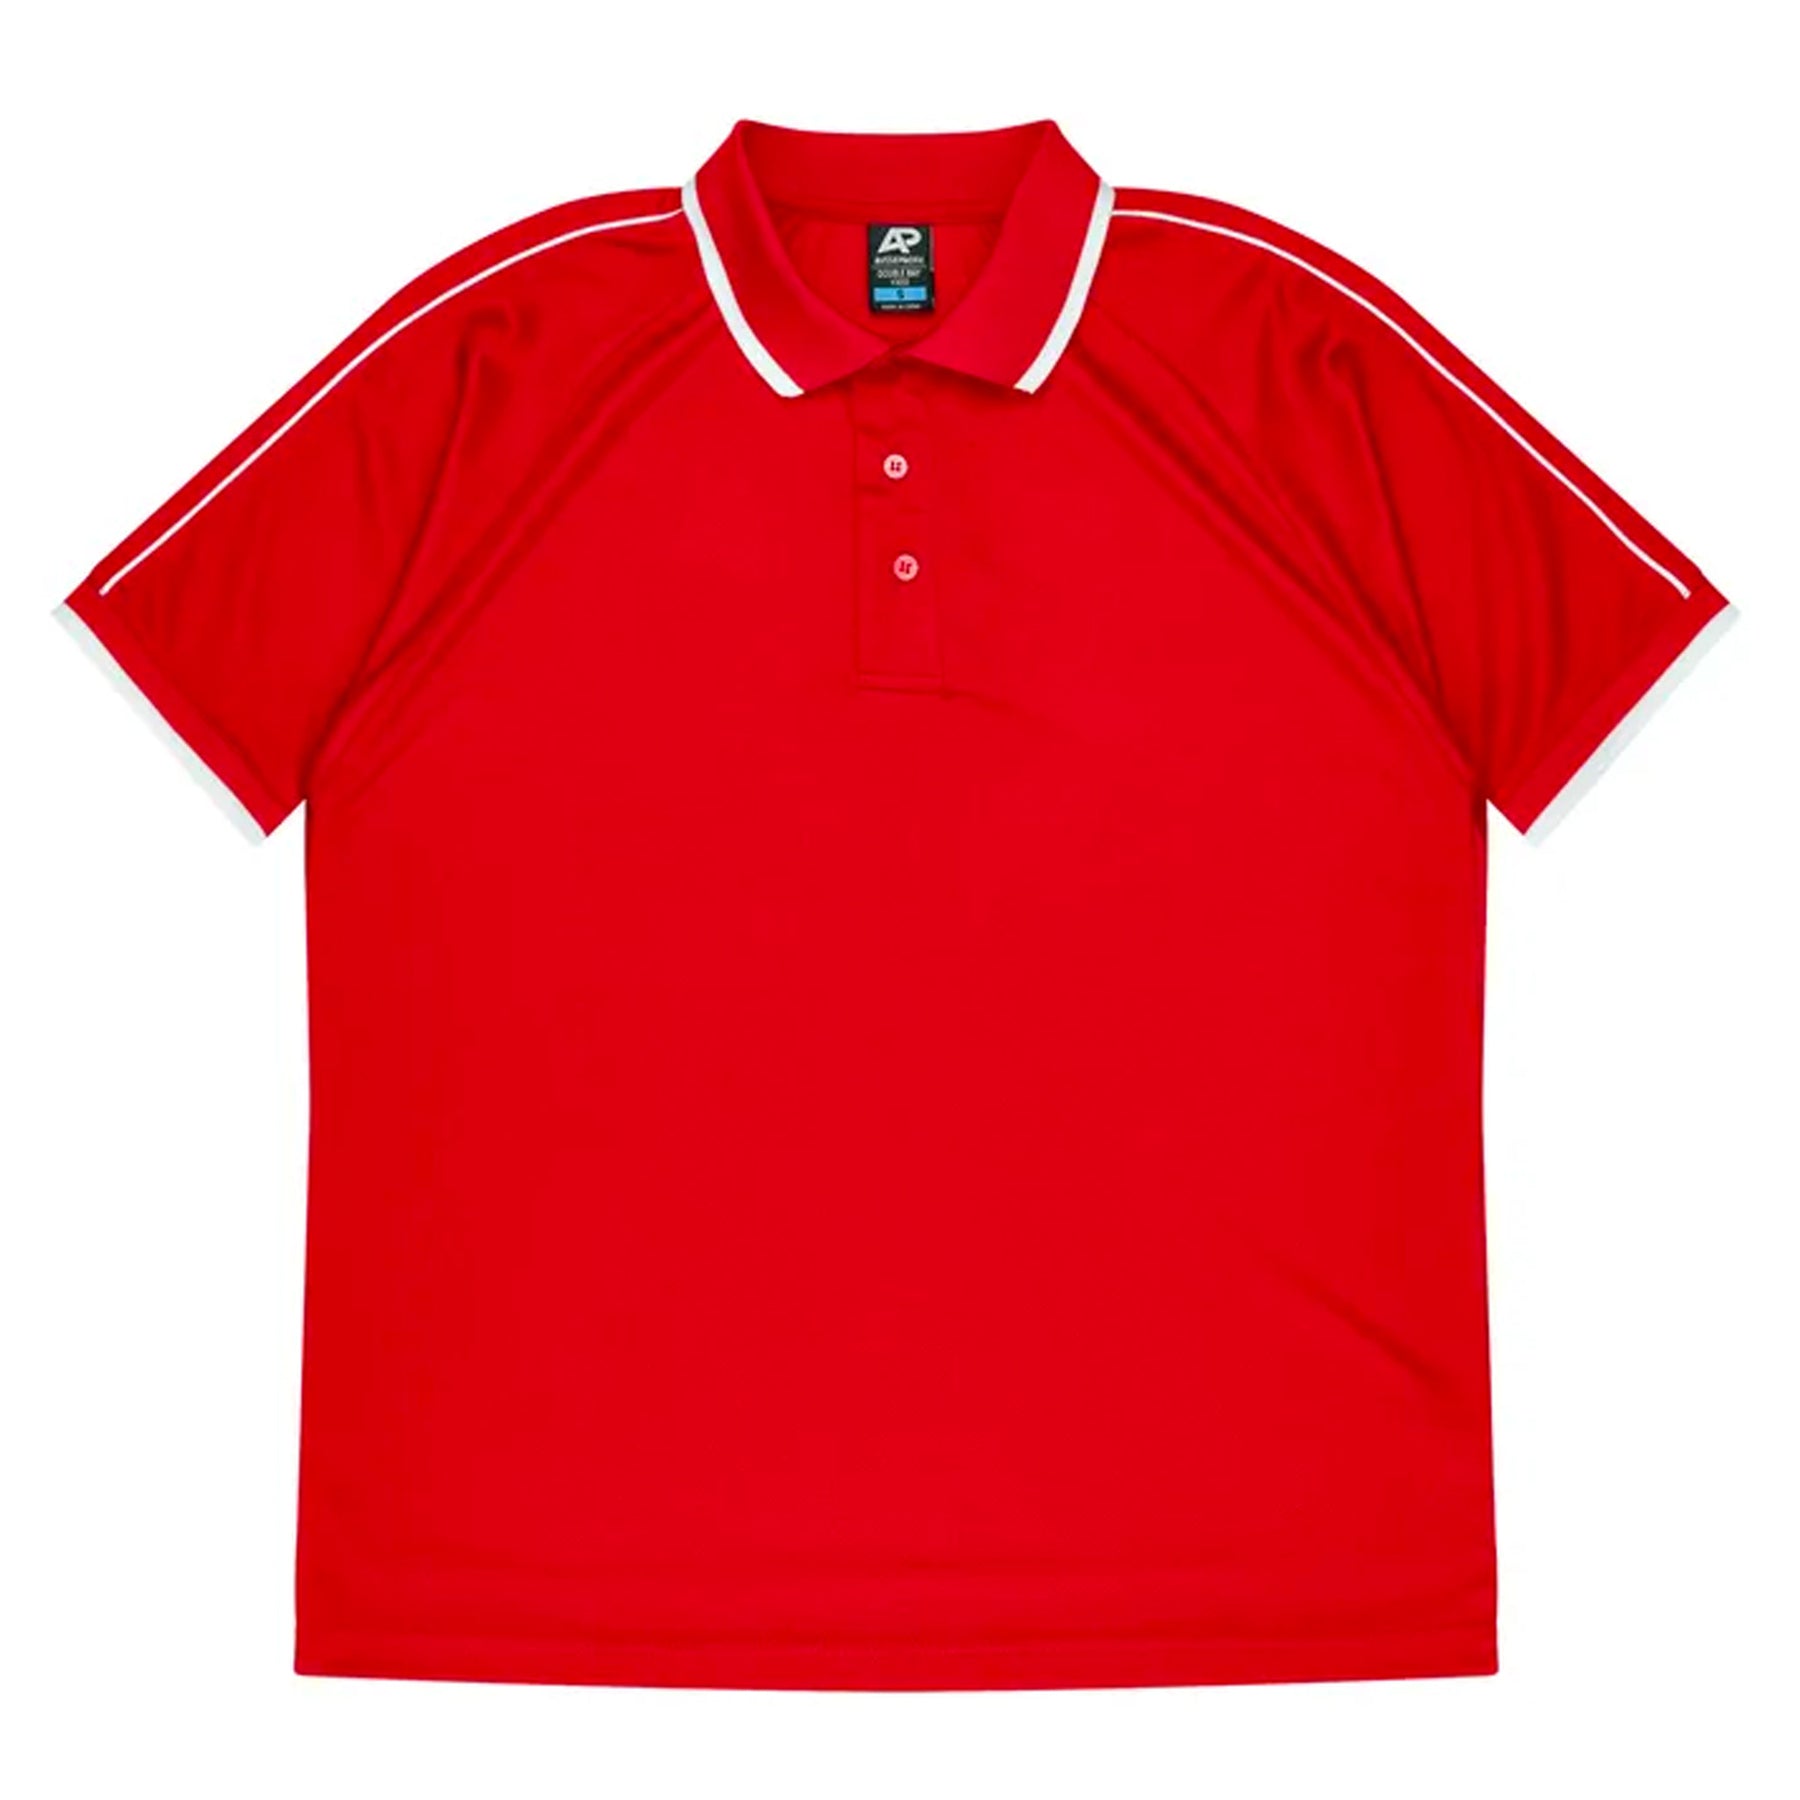 aussie pacific double bay mens polo in red white